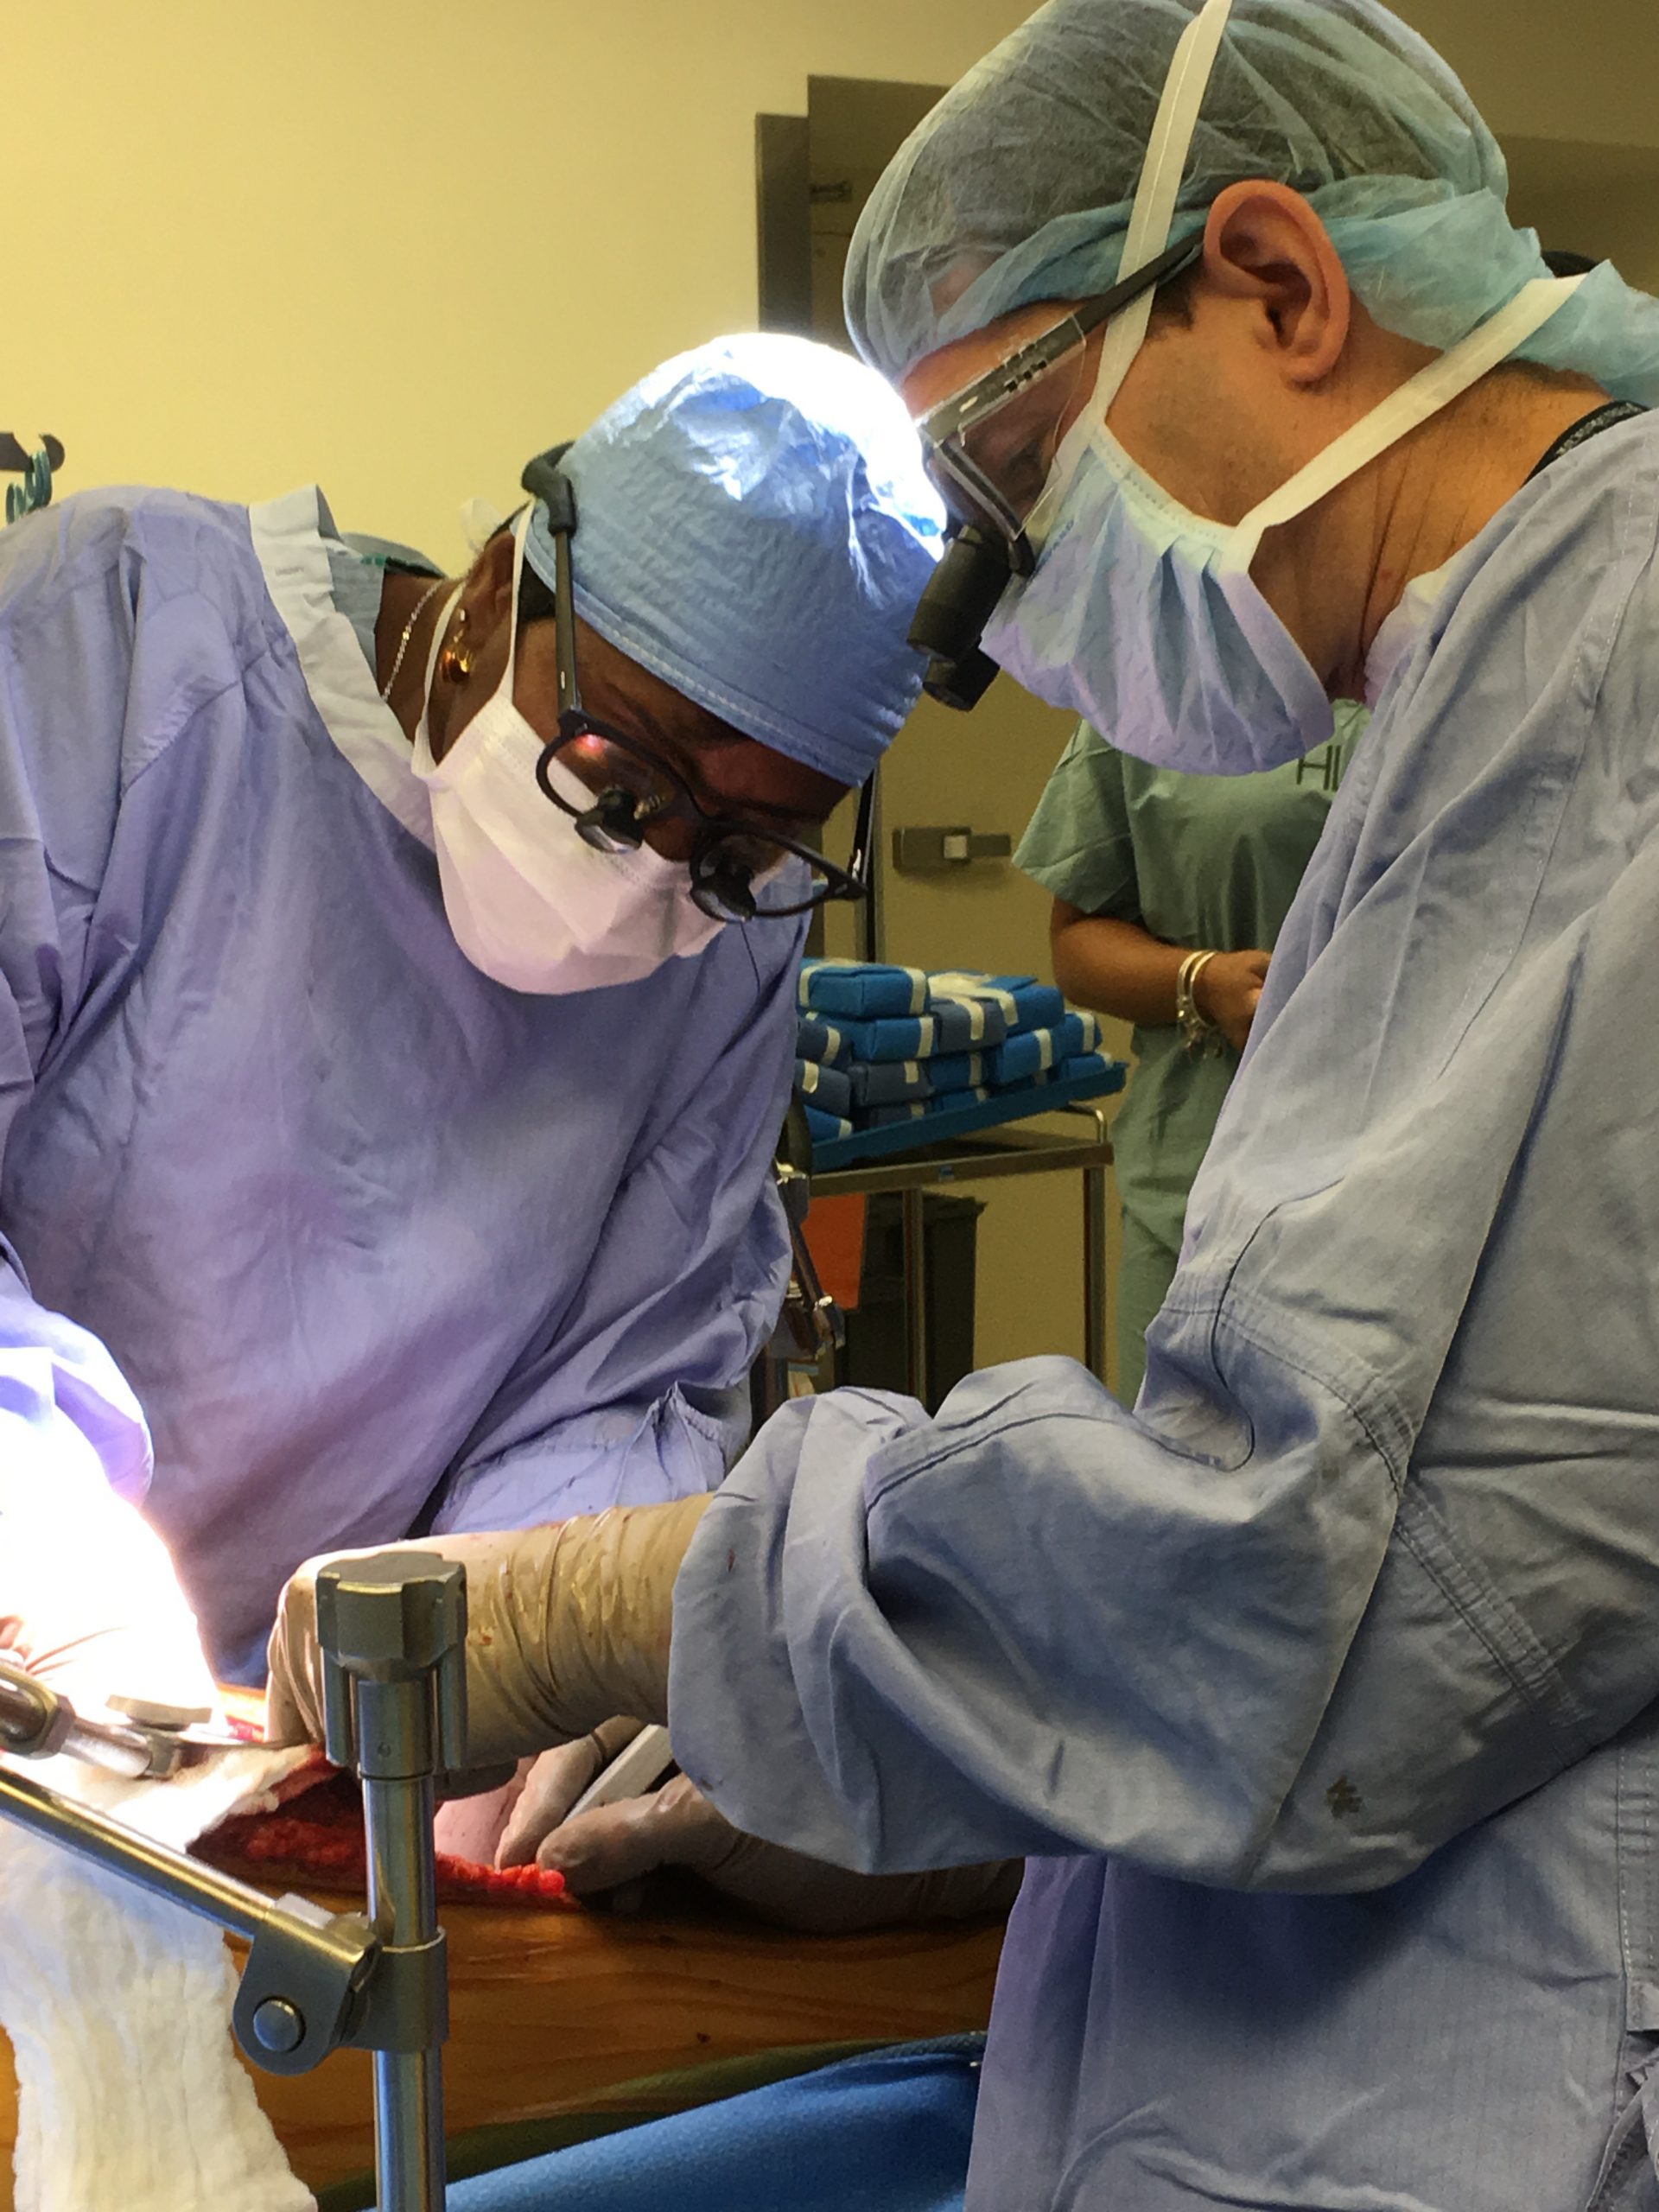 Georgeine Smith and Dr. Peter Abt performing a transplant surgery